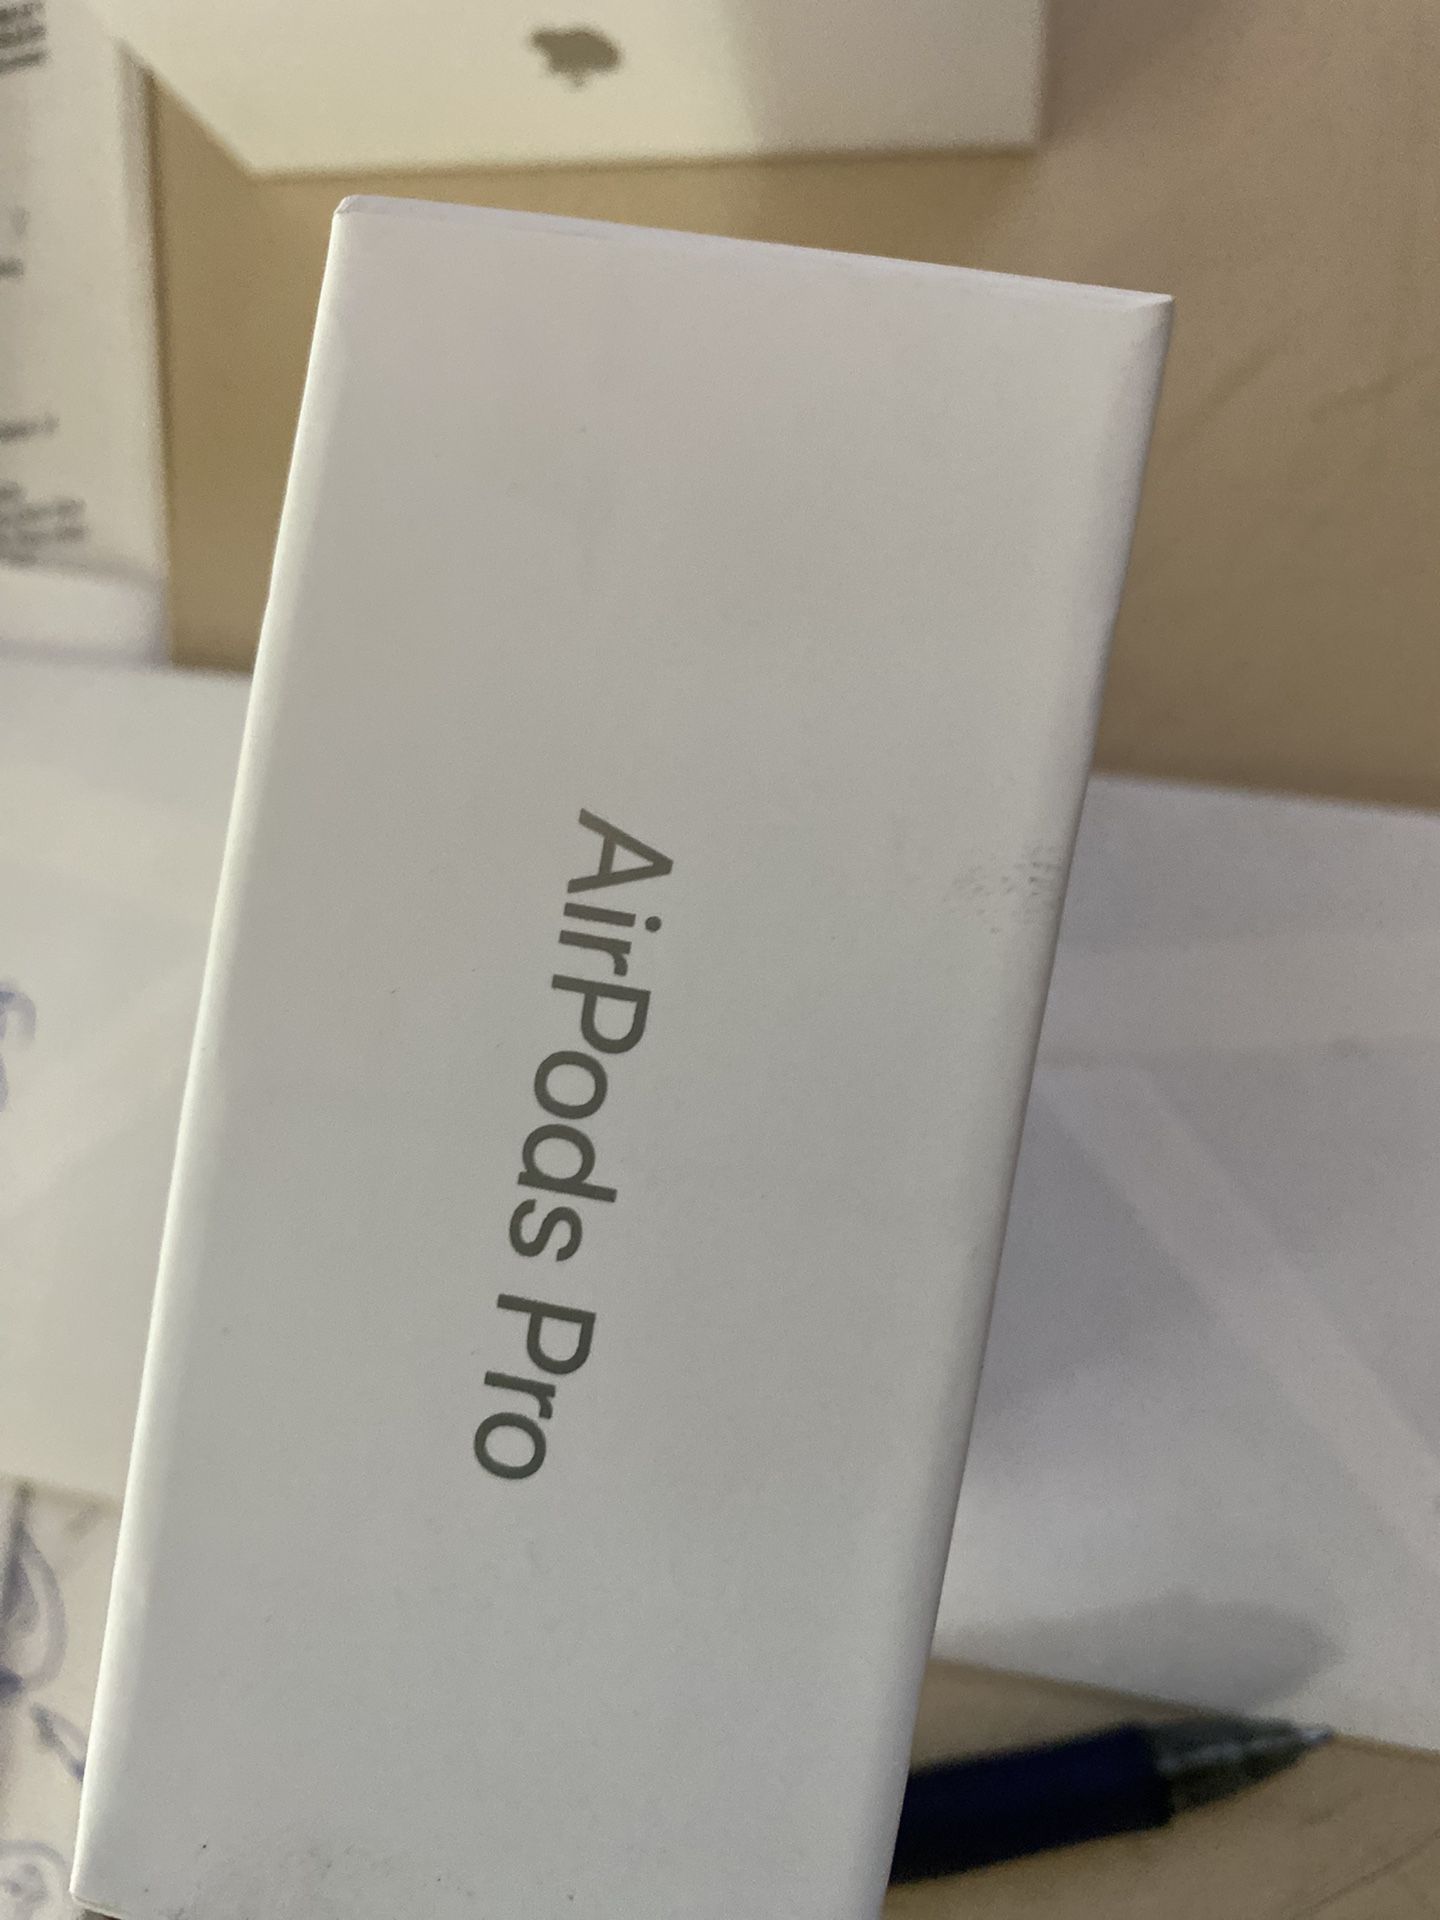 Airpods Pro (2nd generation) 